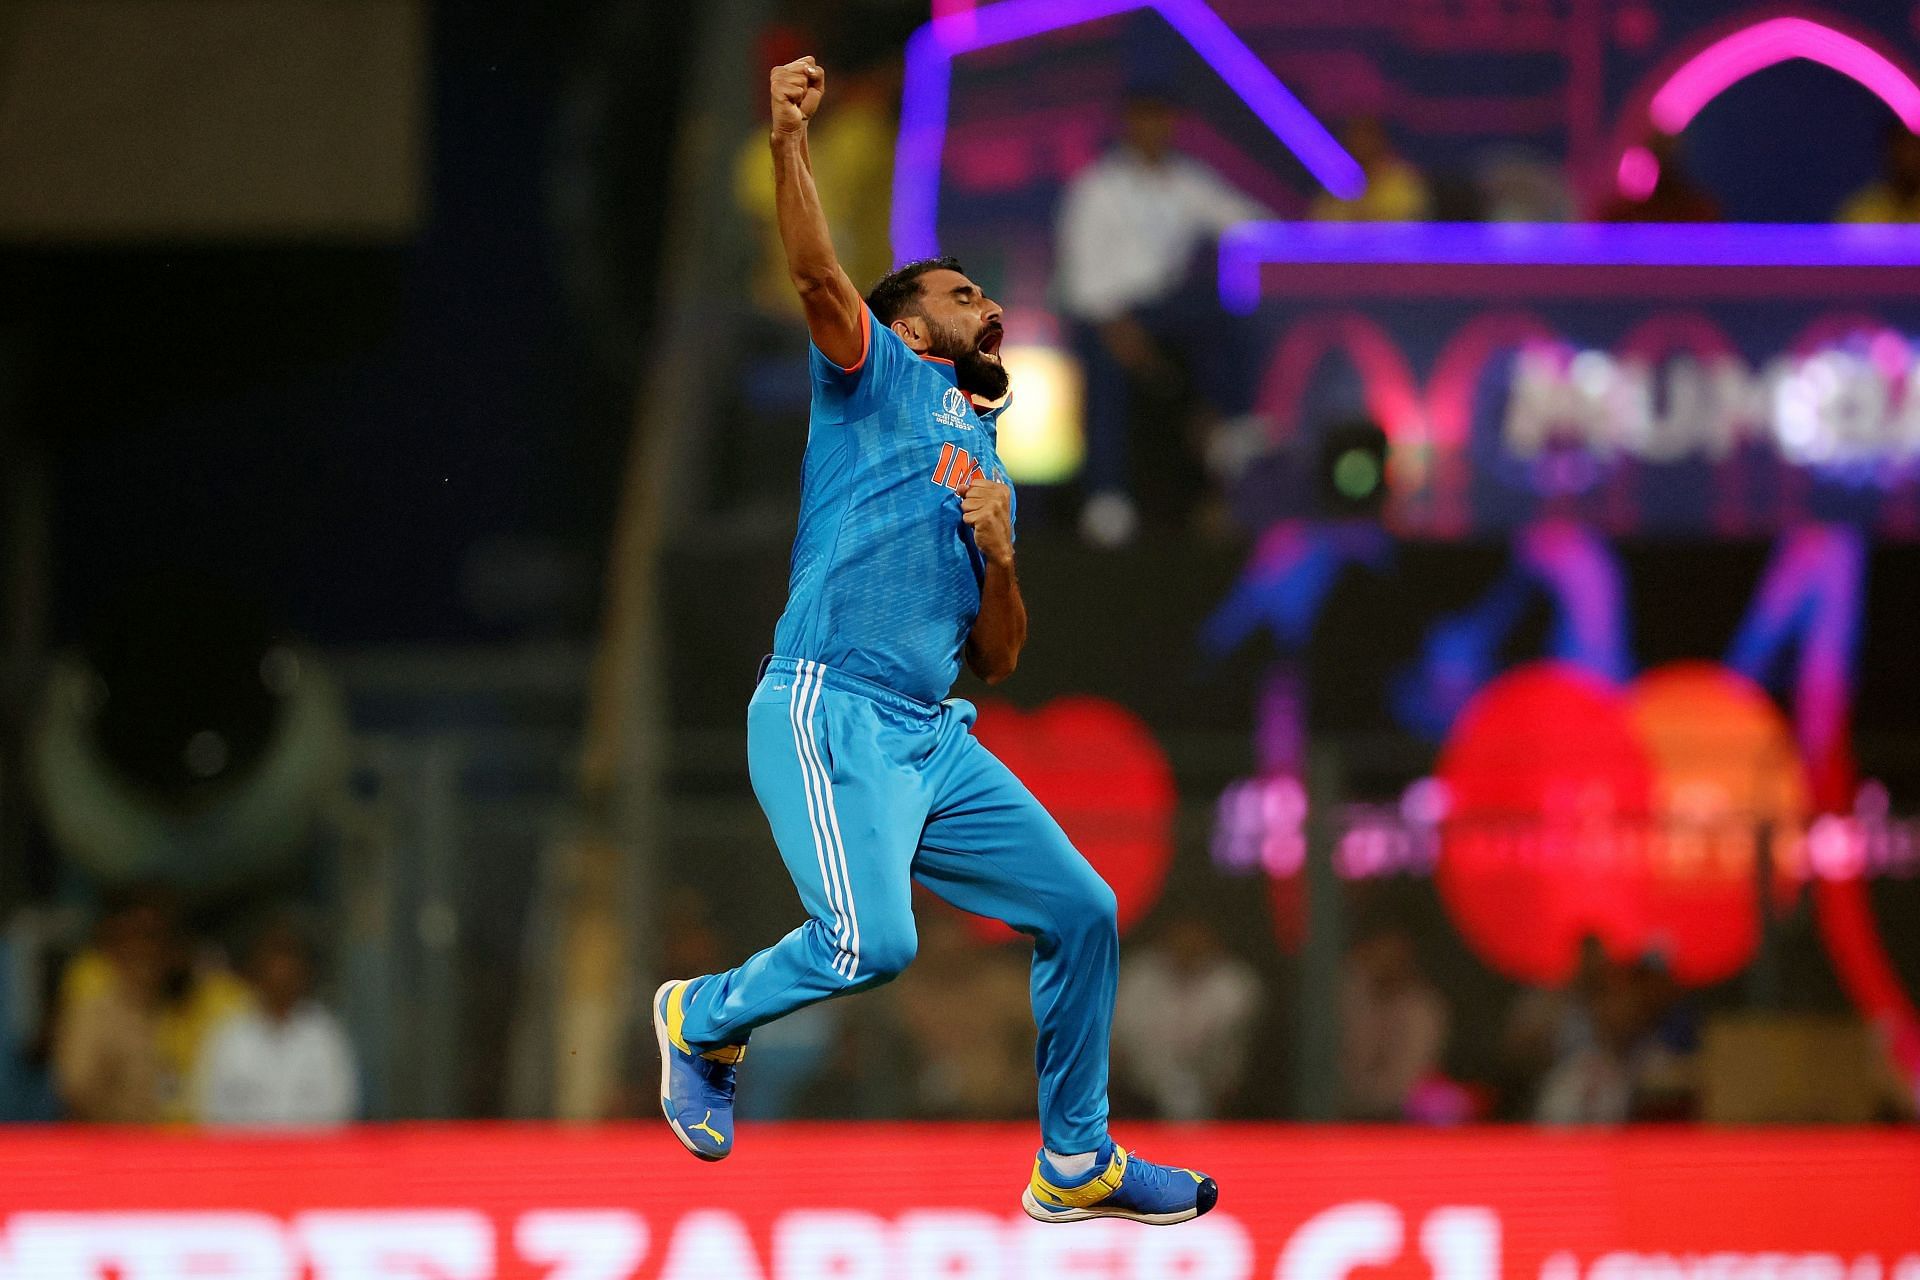 Mohammed Shami has been subjected to vicious online abuse. (Pic: Getty Images)